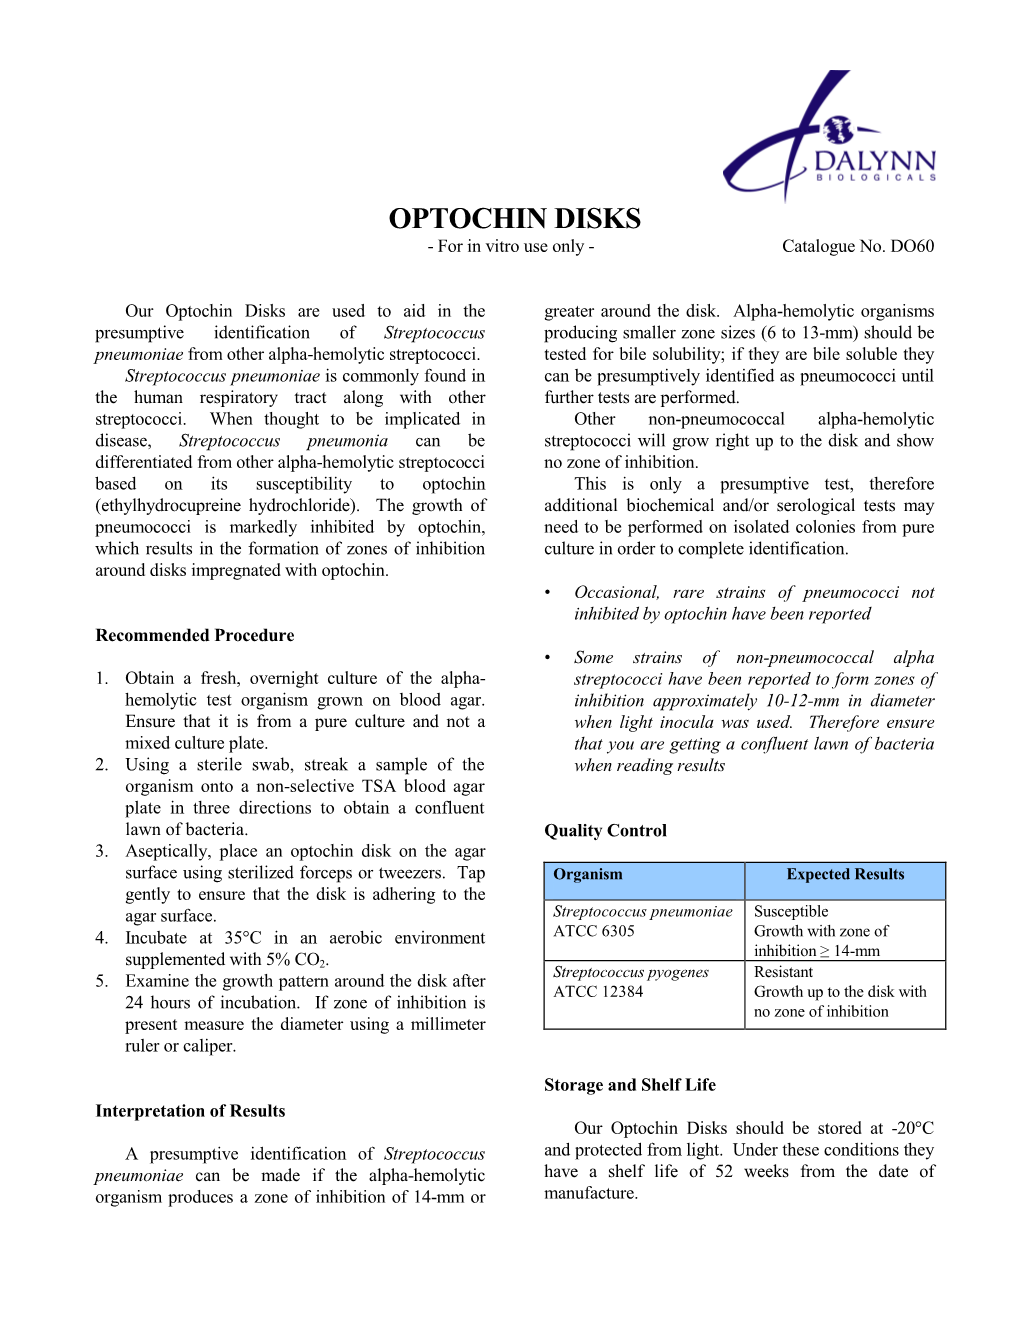 OPTOCHIN DISKS - for in Vitro Use Only - Catalogue No